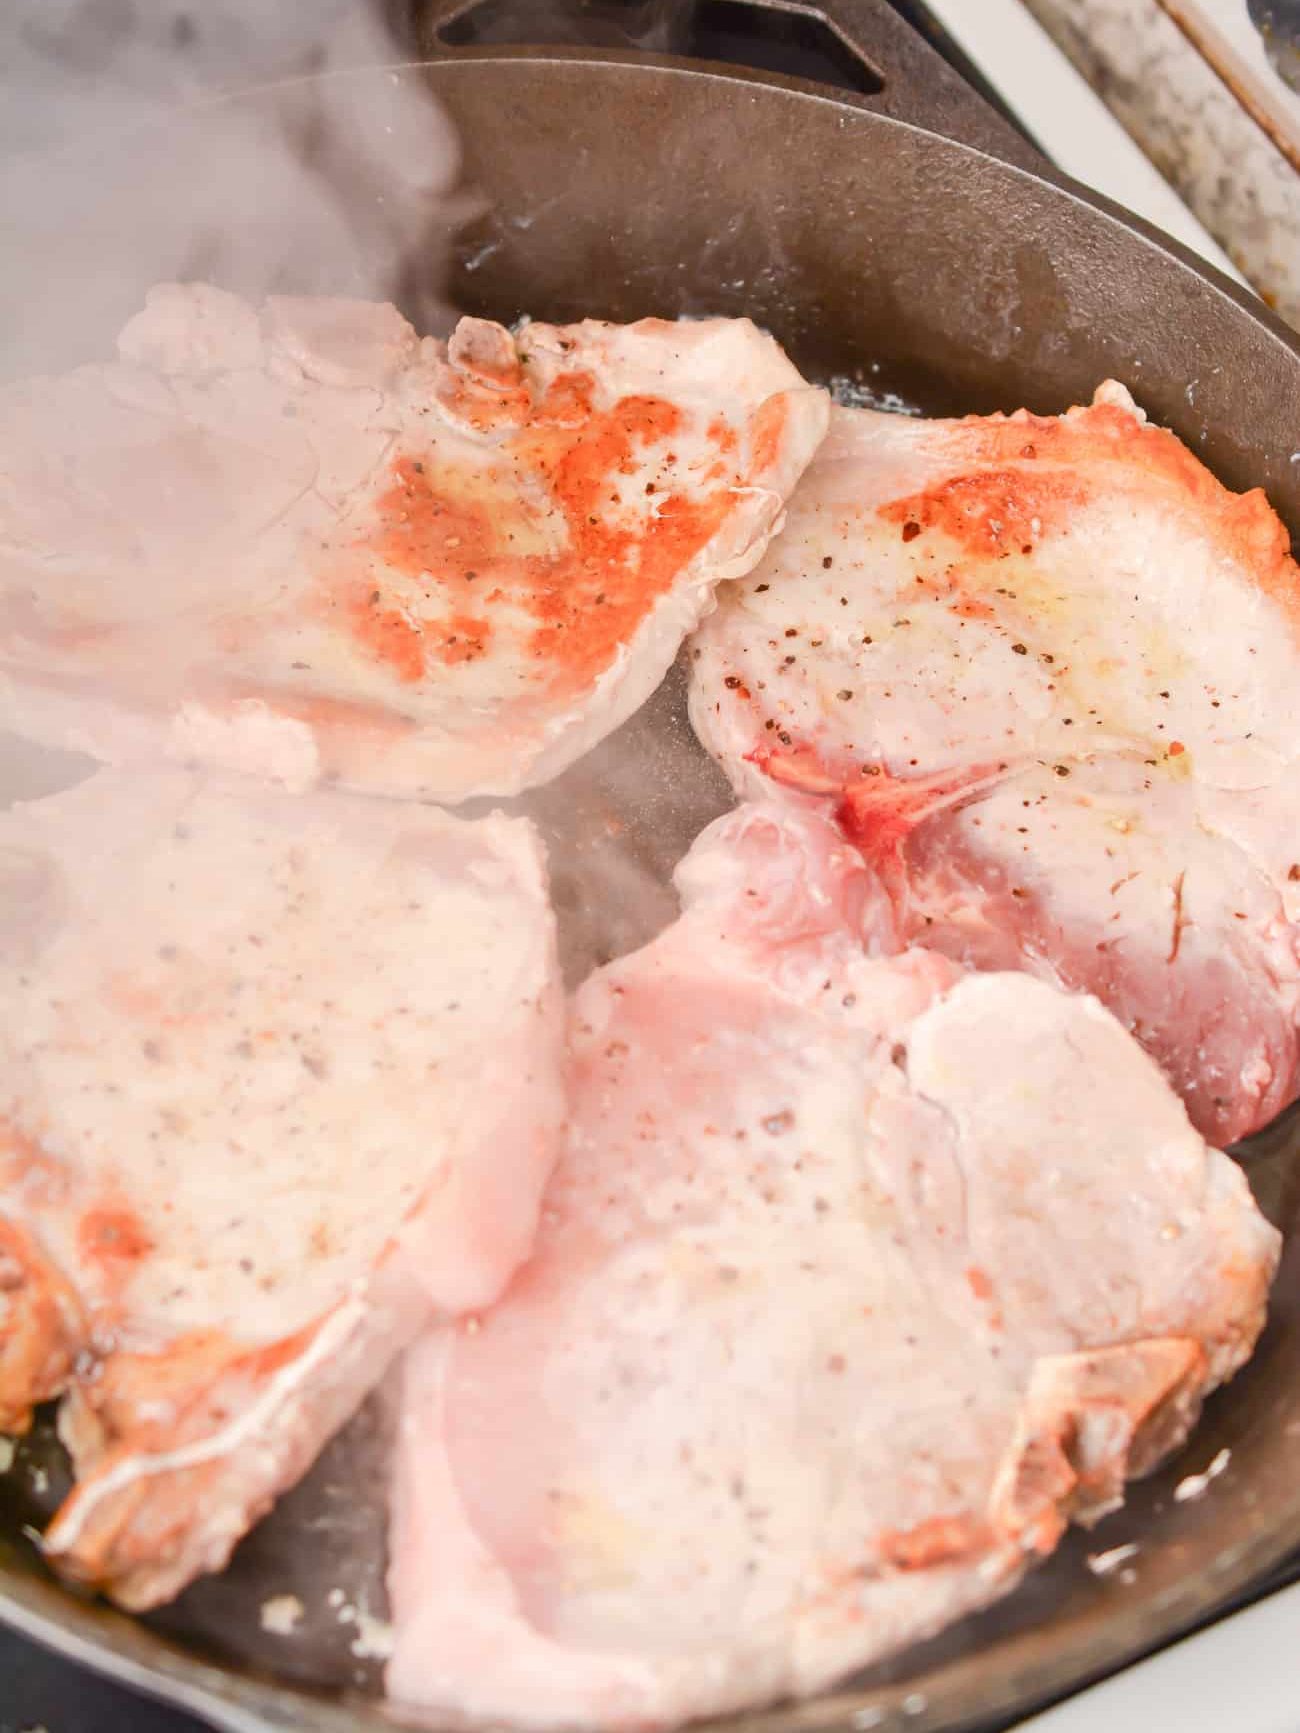 Heat the oil in a skillet over medium-high heat and sear both sides of the pork chops. Remove and set aside.